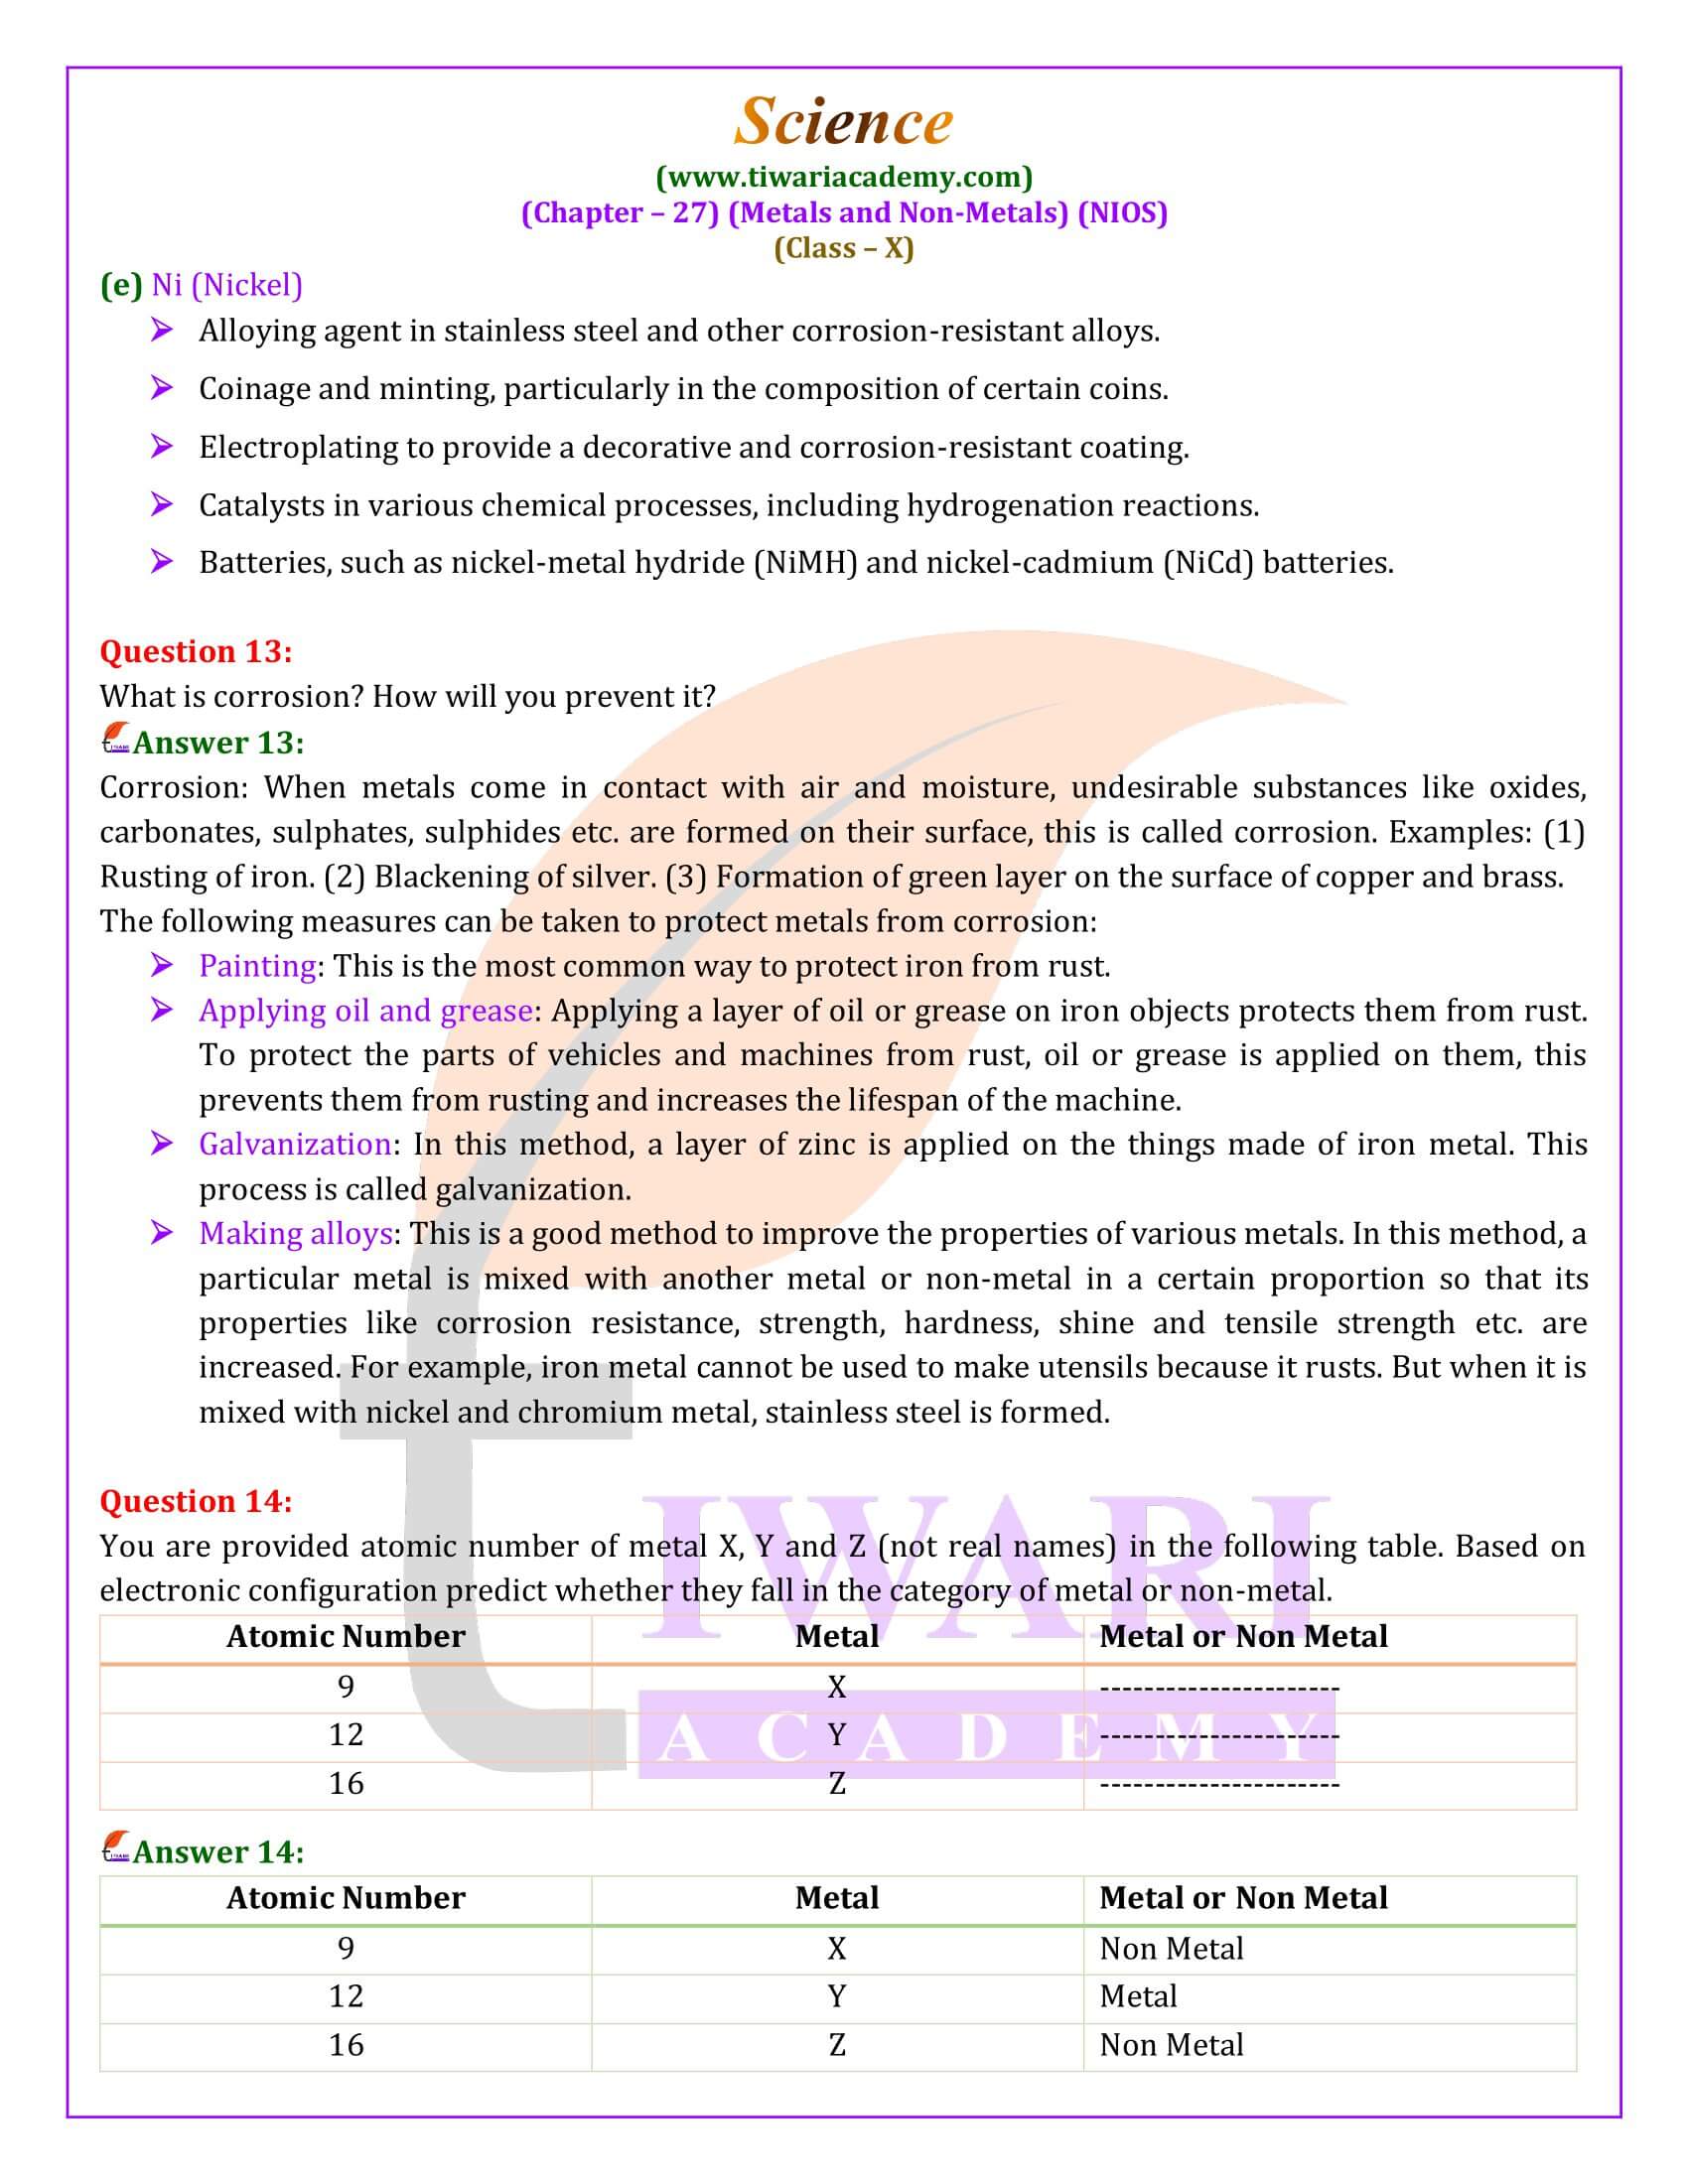 NIOS Class 10 Science Chapter 27 Guide in Hindi